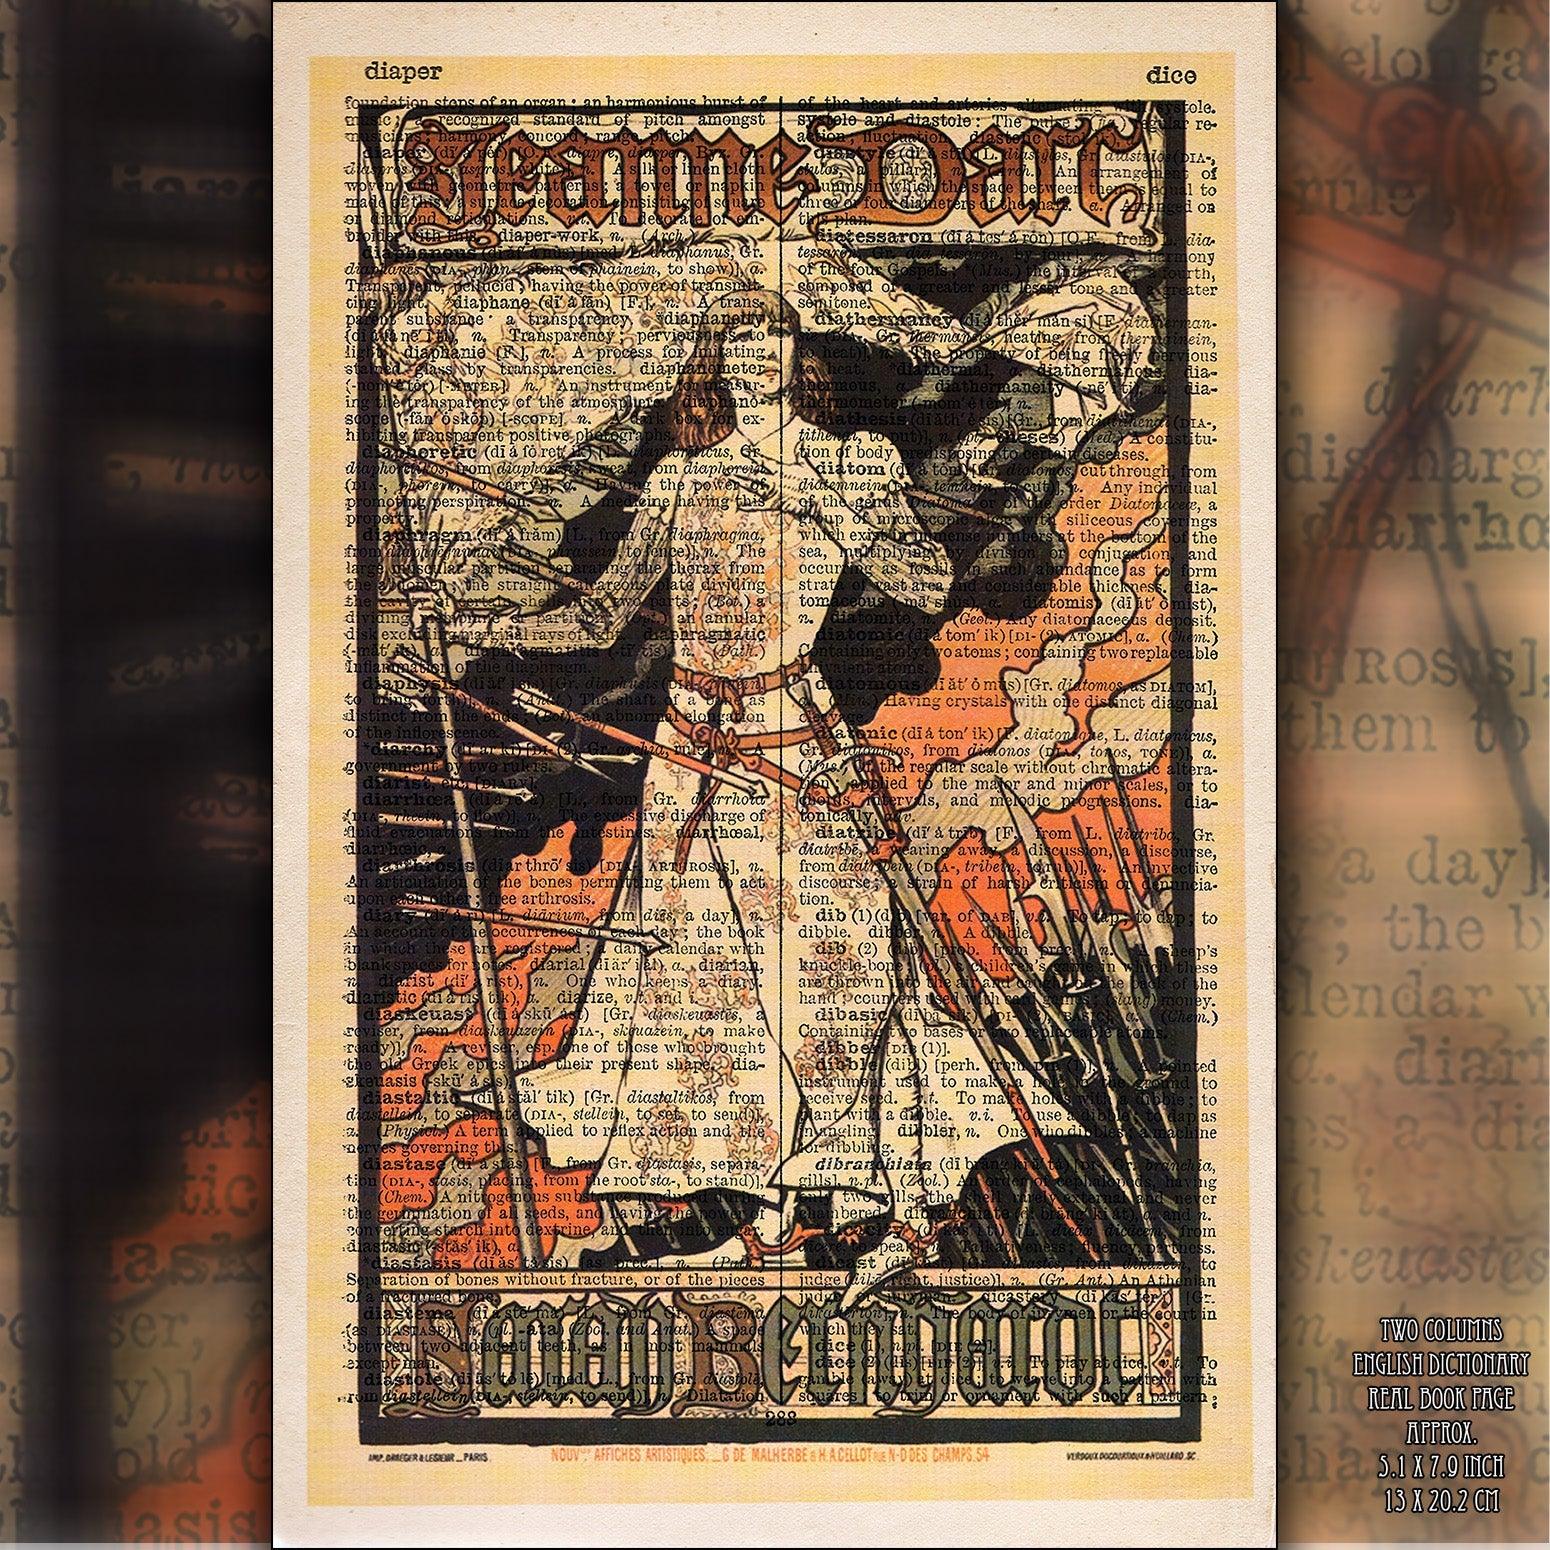 Give your home decor a touch of elegance through our exquisite Jeanne d'Arc reproduction poster. The artwork is a collage with the poster for the drama Joan of Arc starring Sarah Bernhardt, performed at the Théâtre de la Renaissance, Paris designed by Eugène Grasset (Swiss graphic designer, ca. 1841-1917). Year of created 1893.